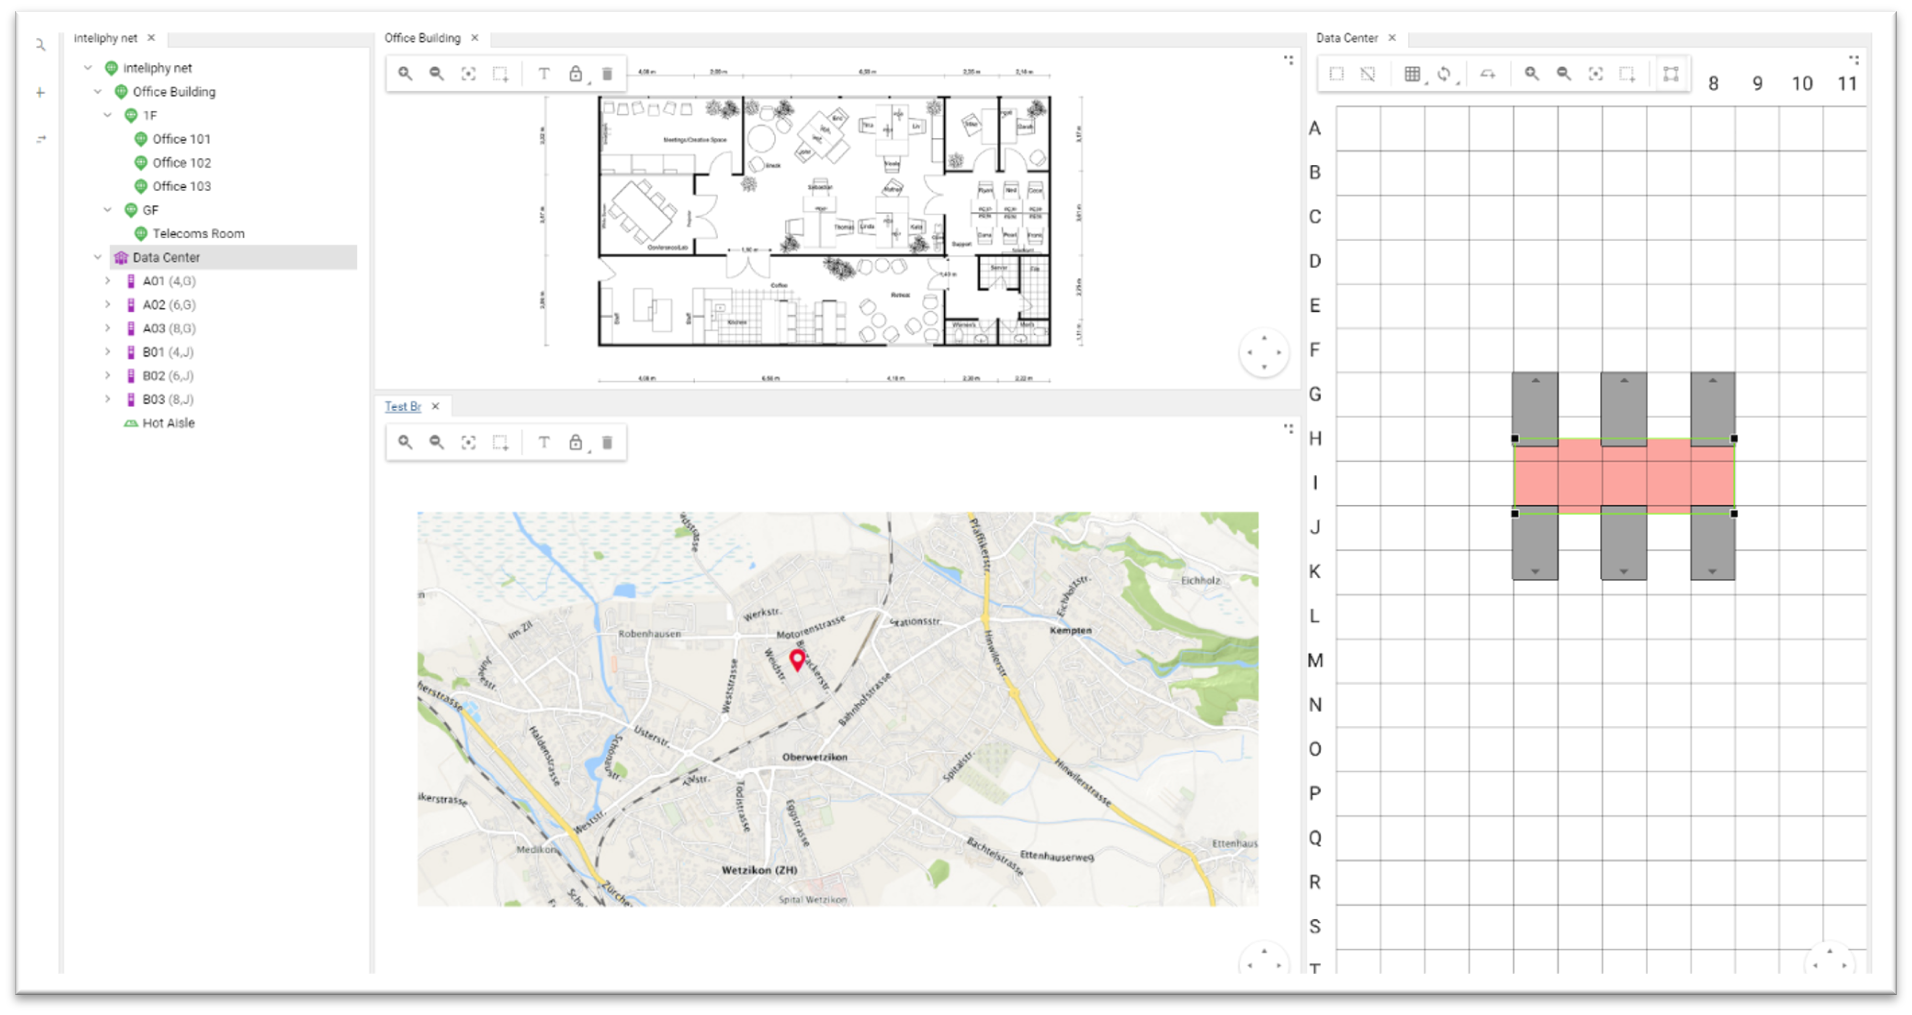 Geographical views and floorplans